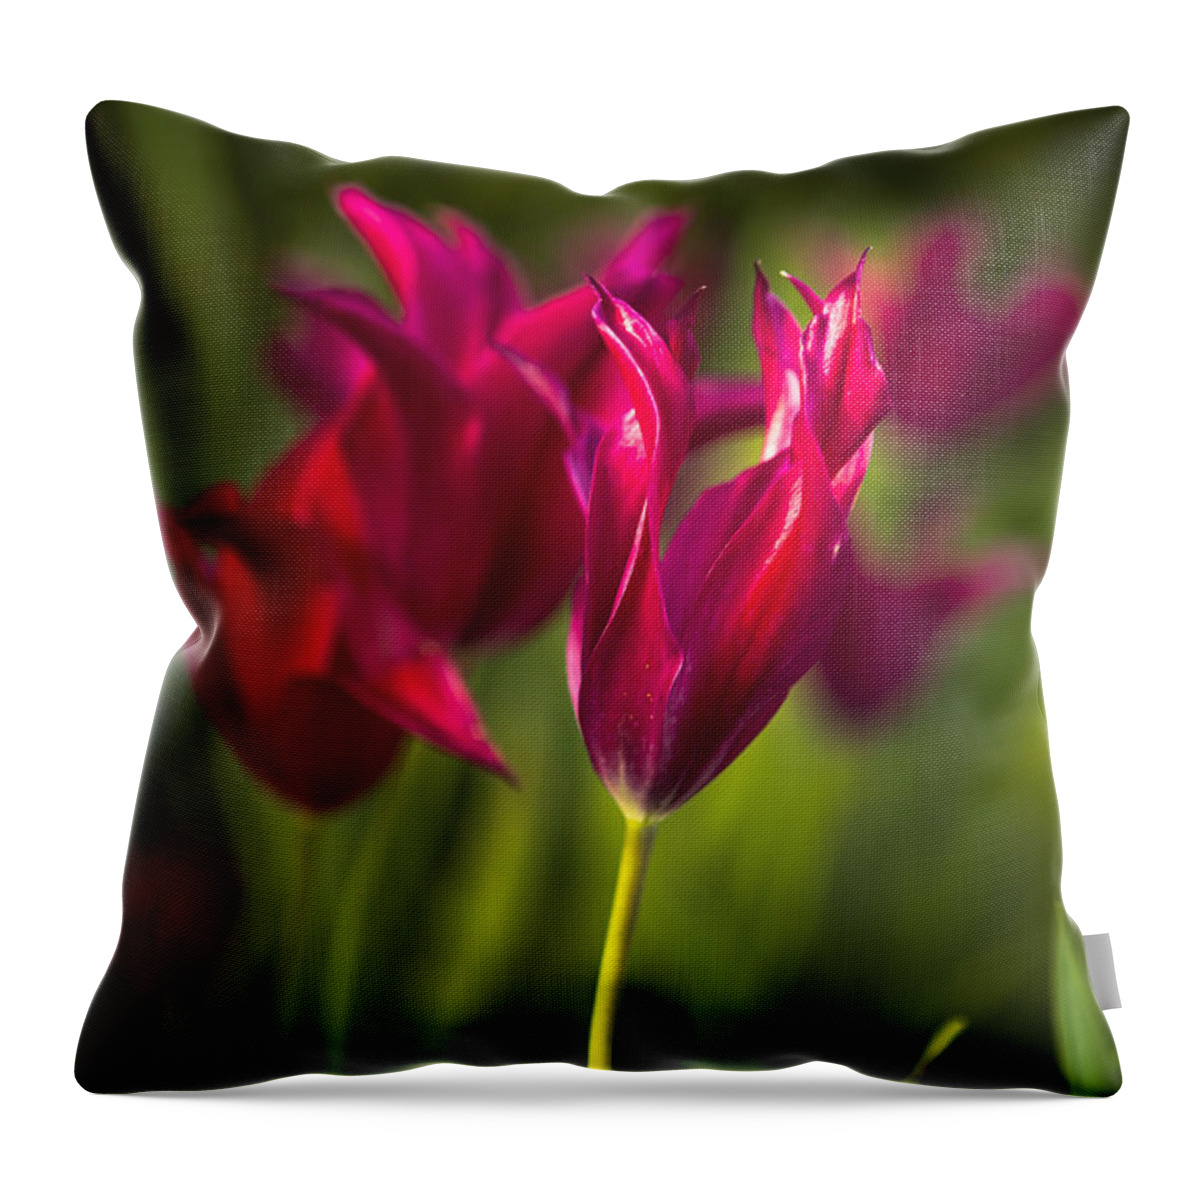 Tulip Throw Pillow featuring the photograph Red Tulips by Belinda Greb